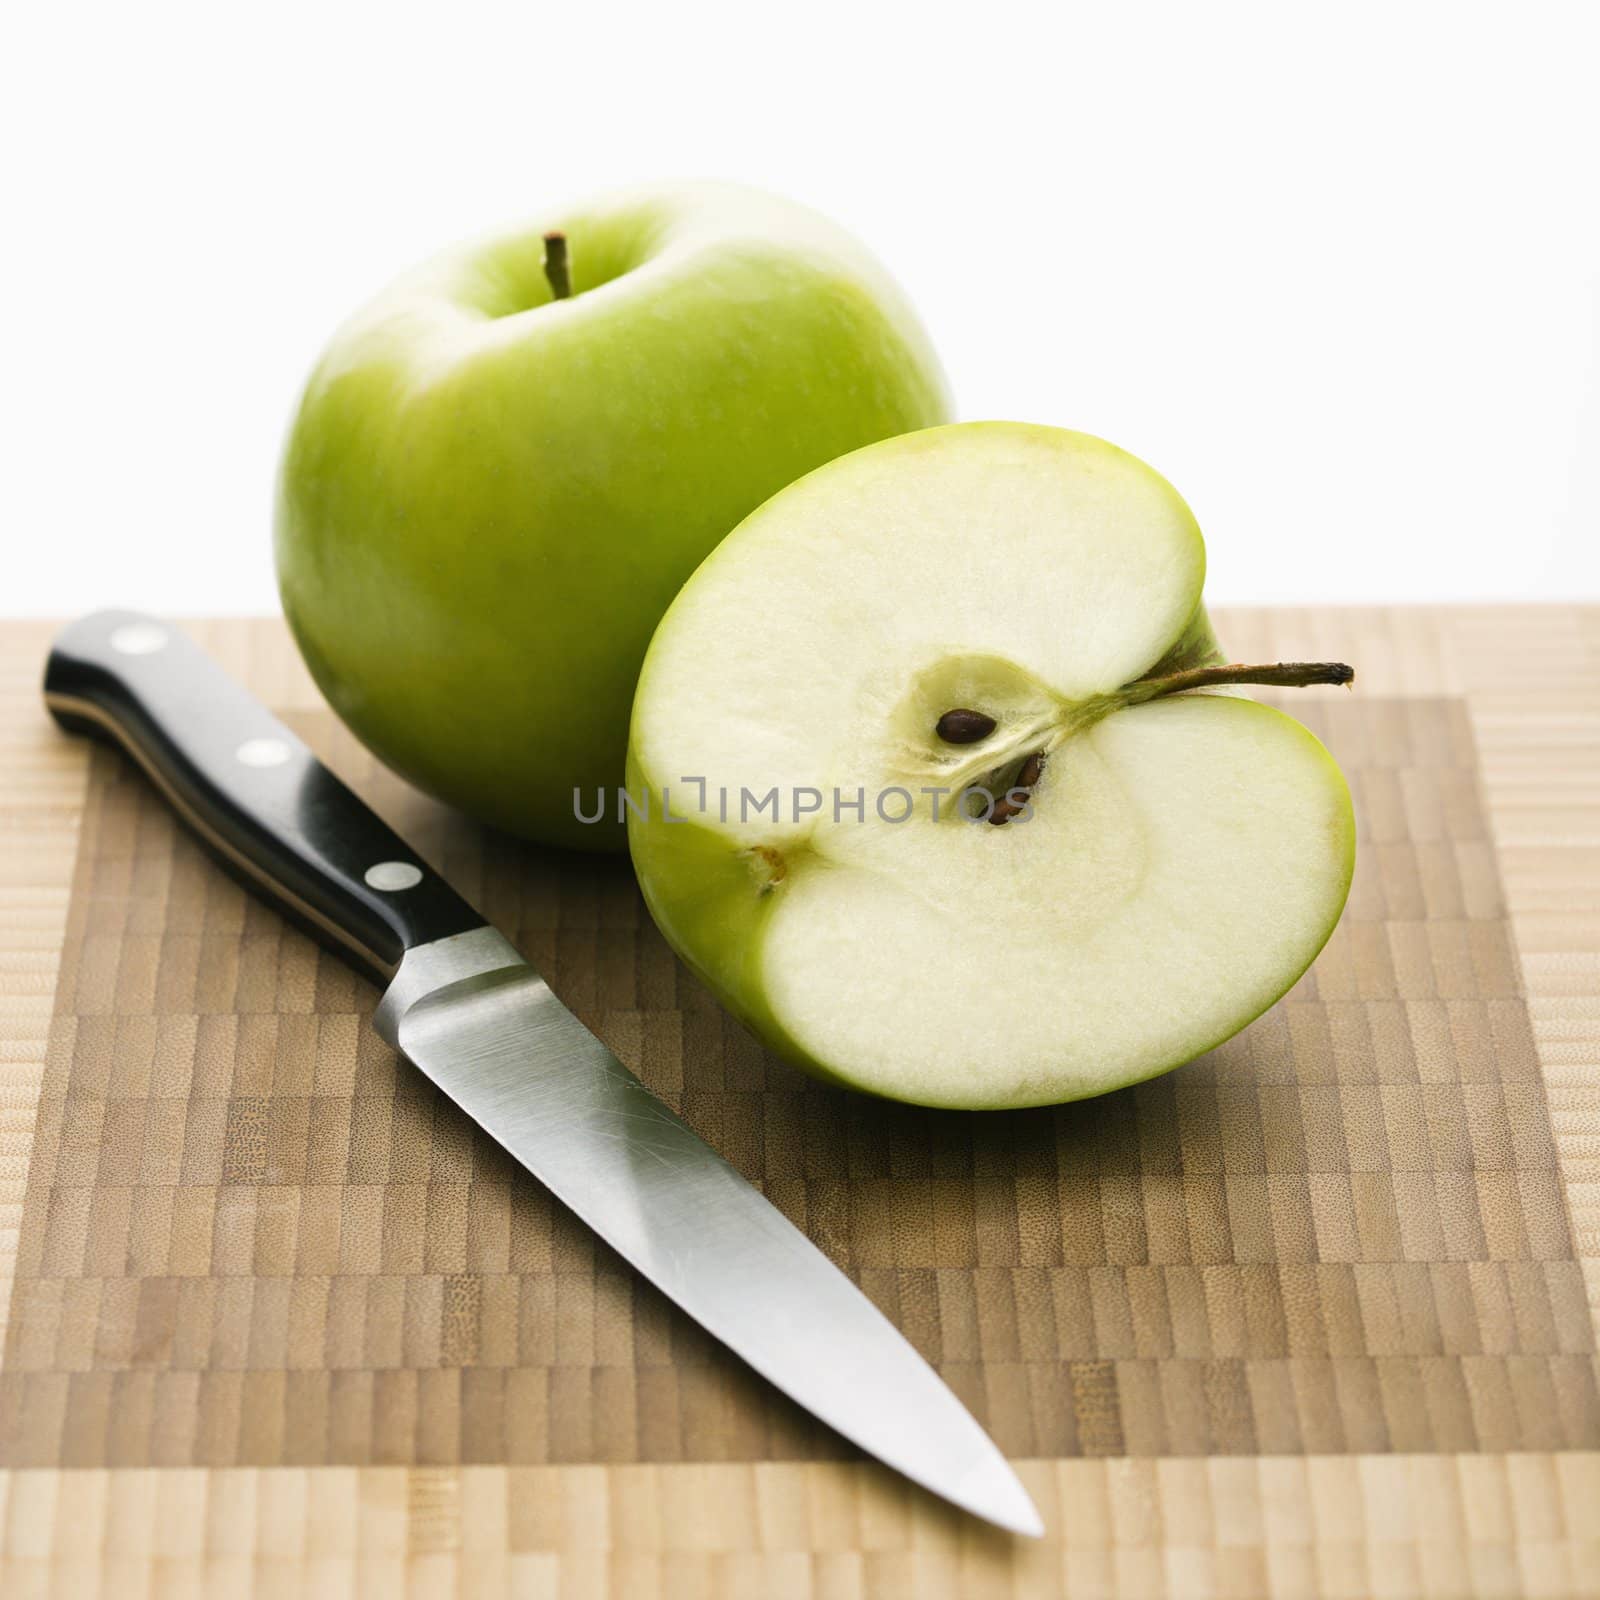 Still life of green apples and knife on cutting board.